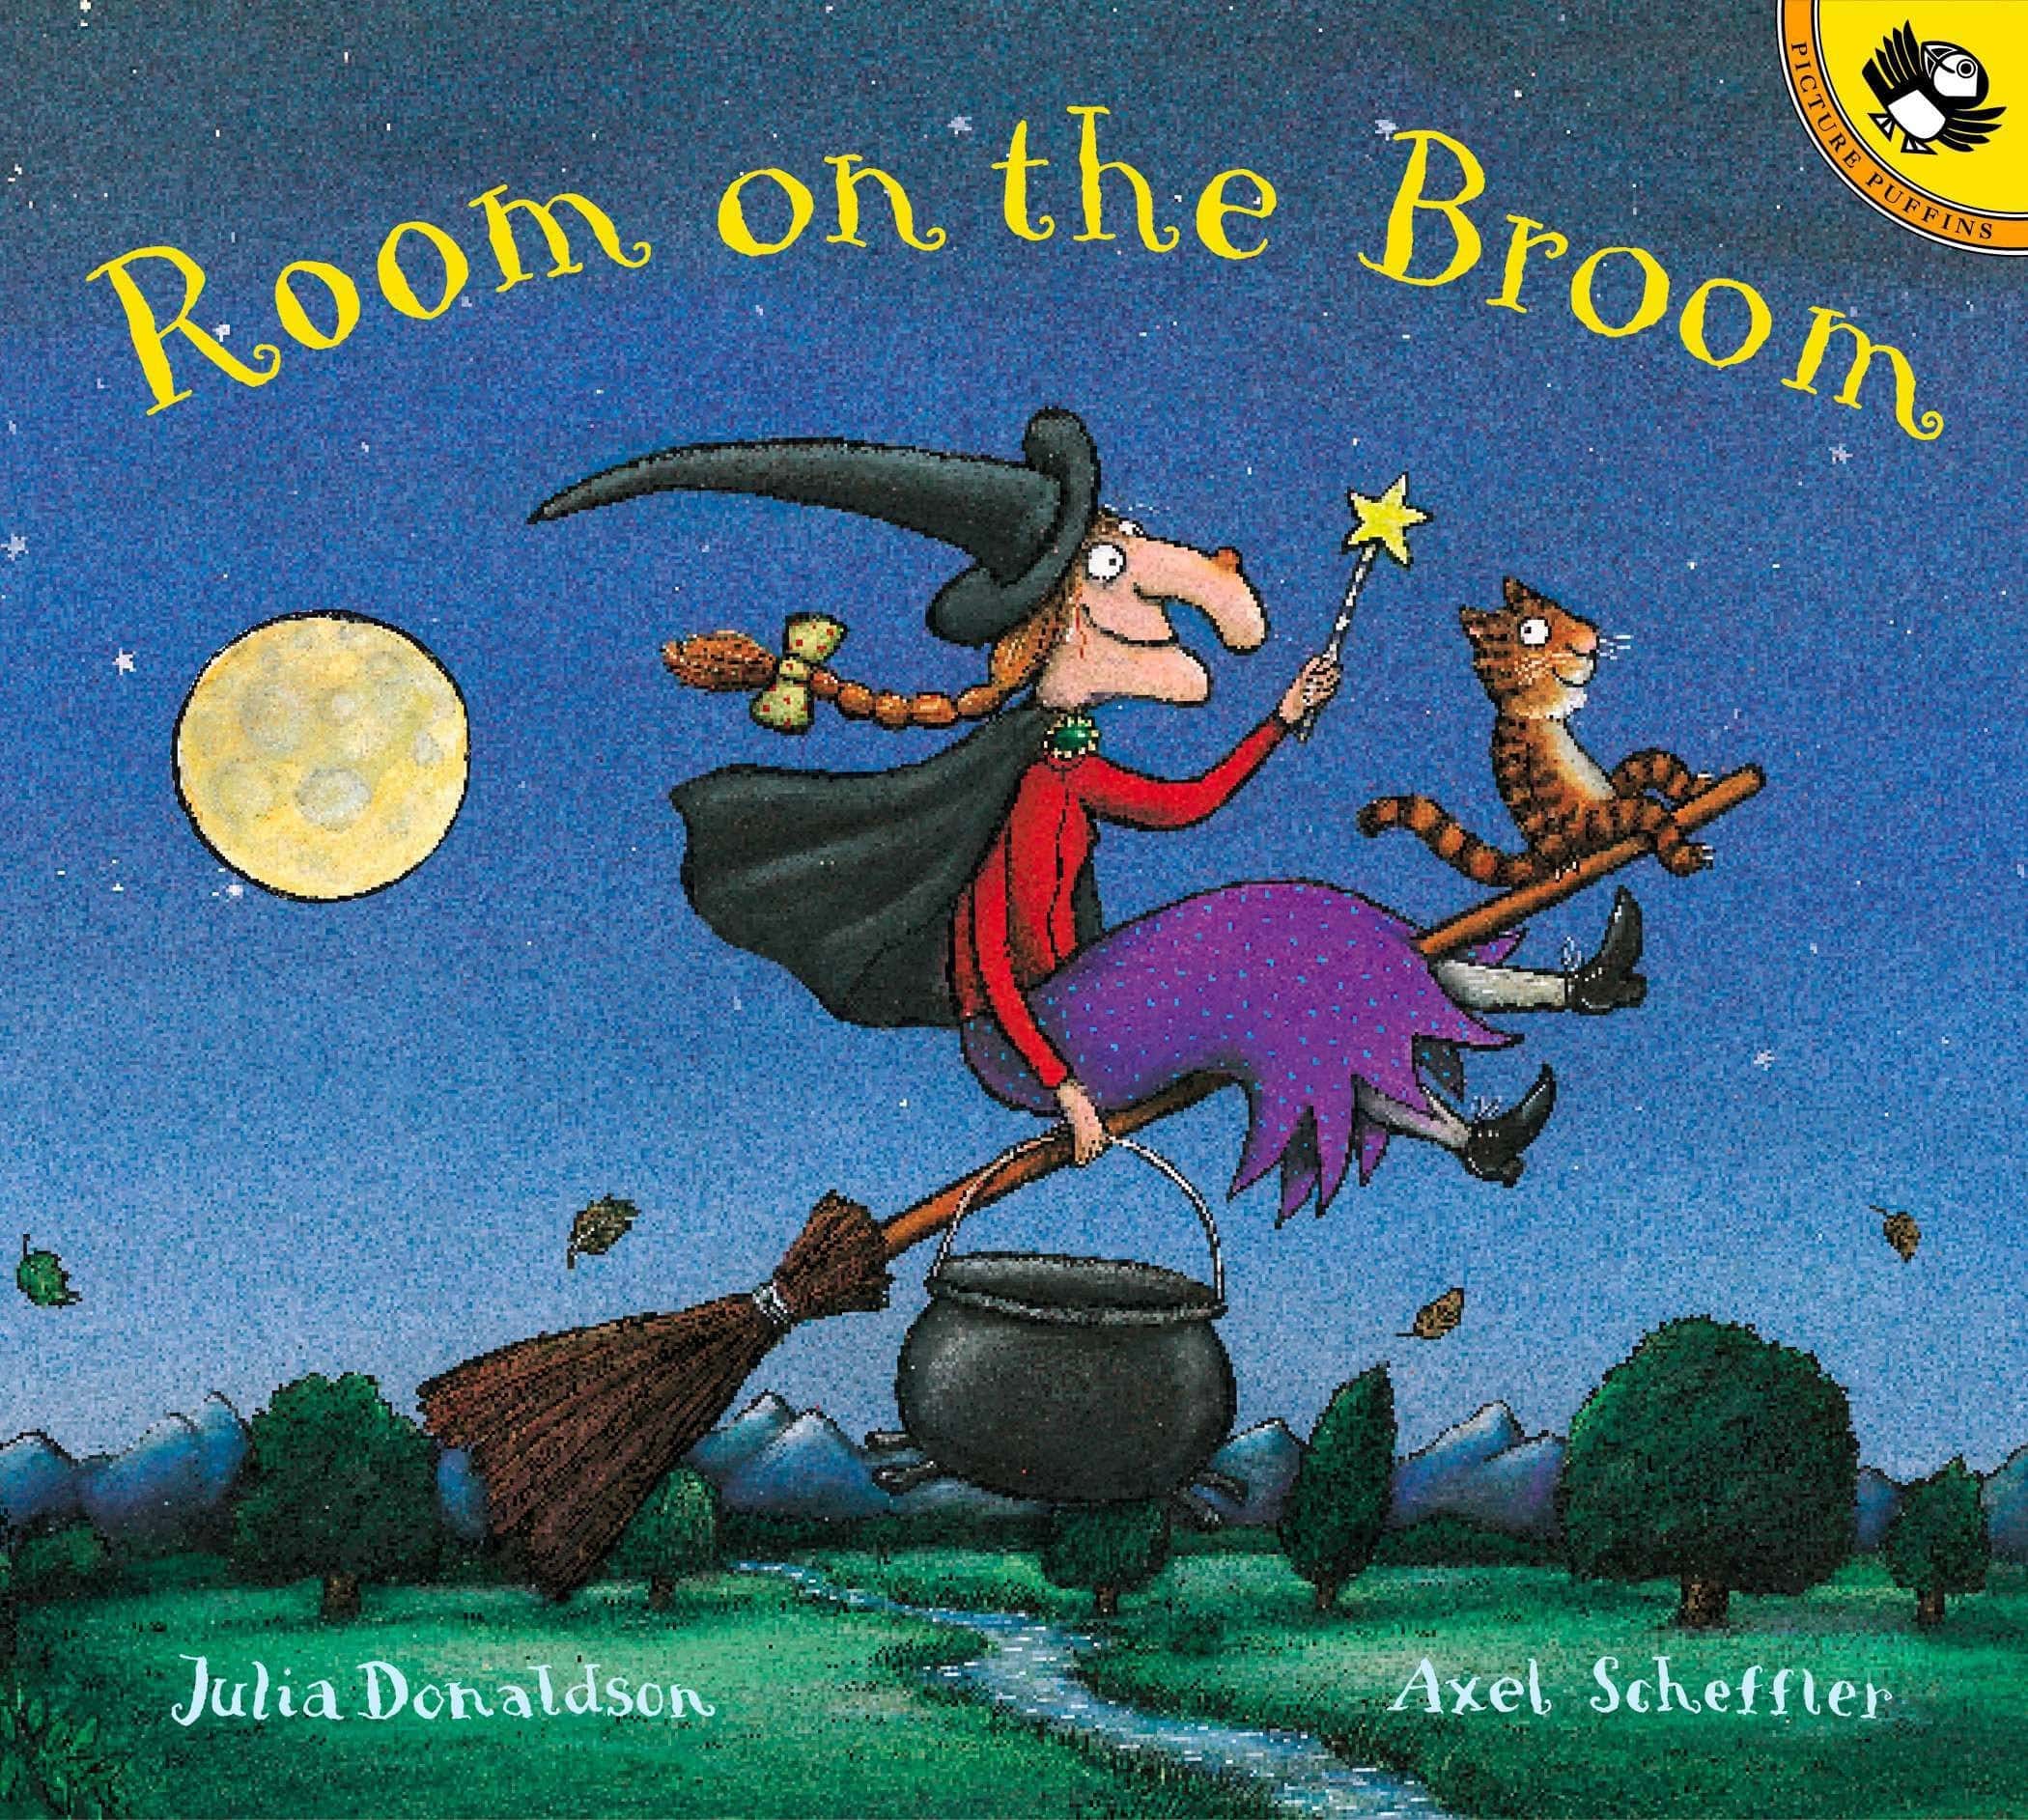 "Room on the Broom" by Julia Donaldson